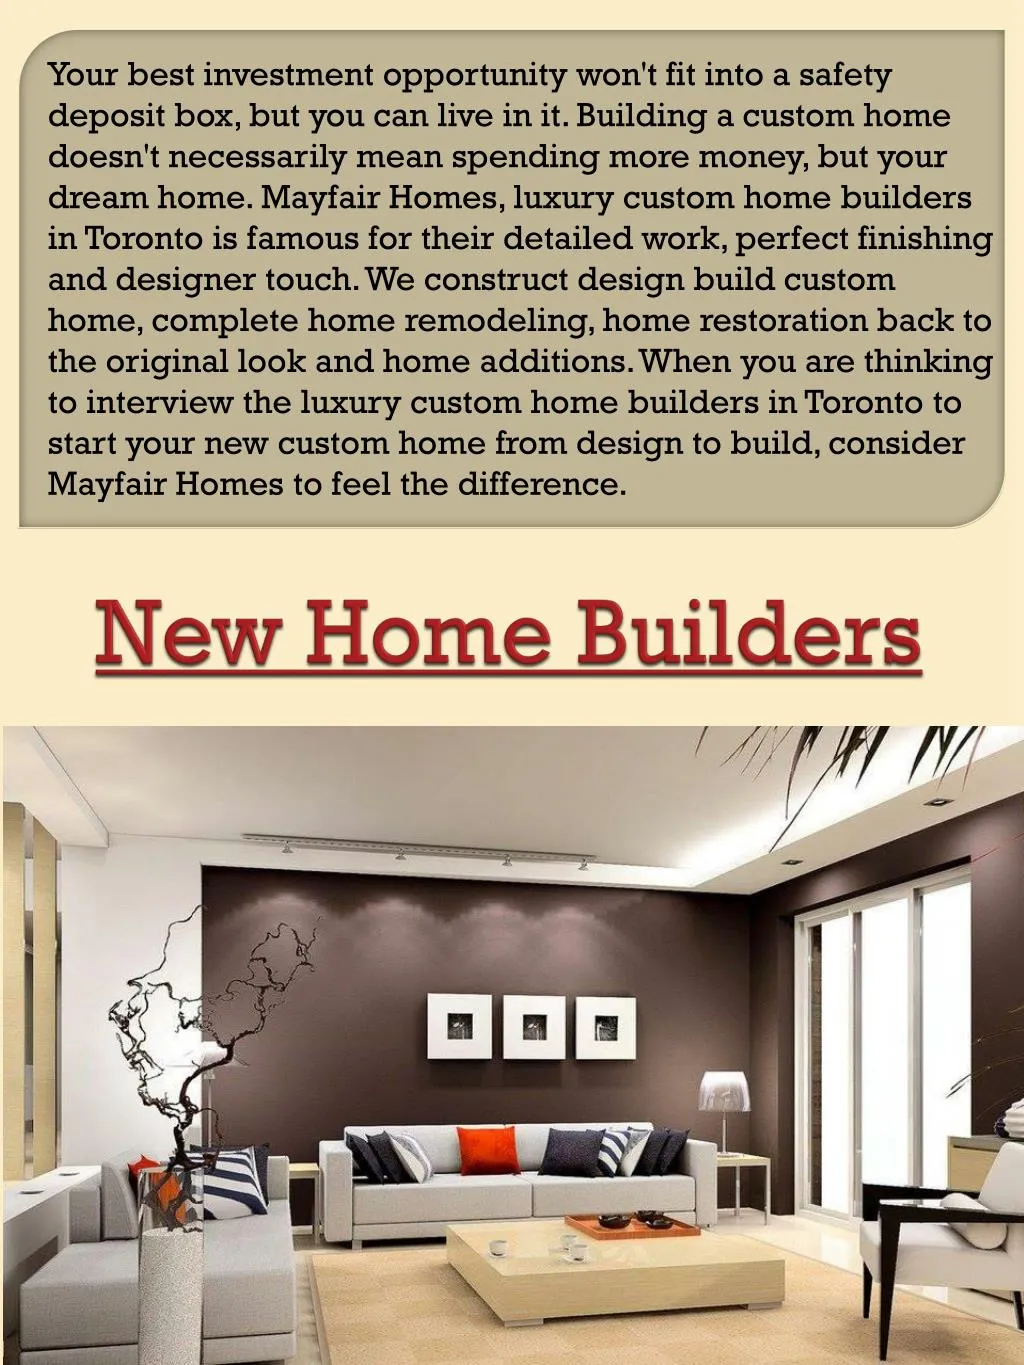 new home builders